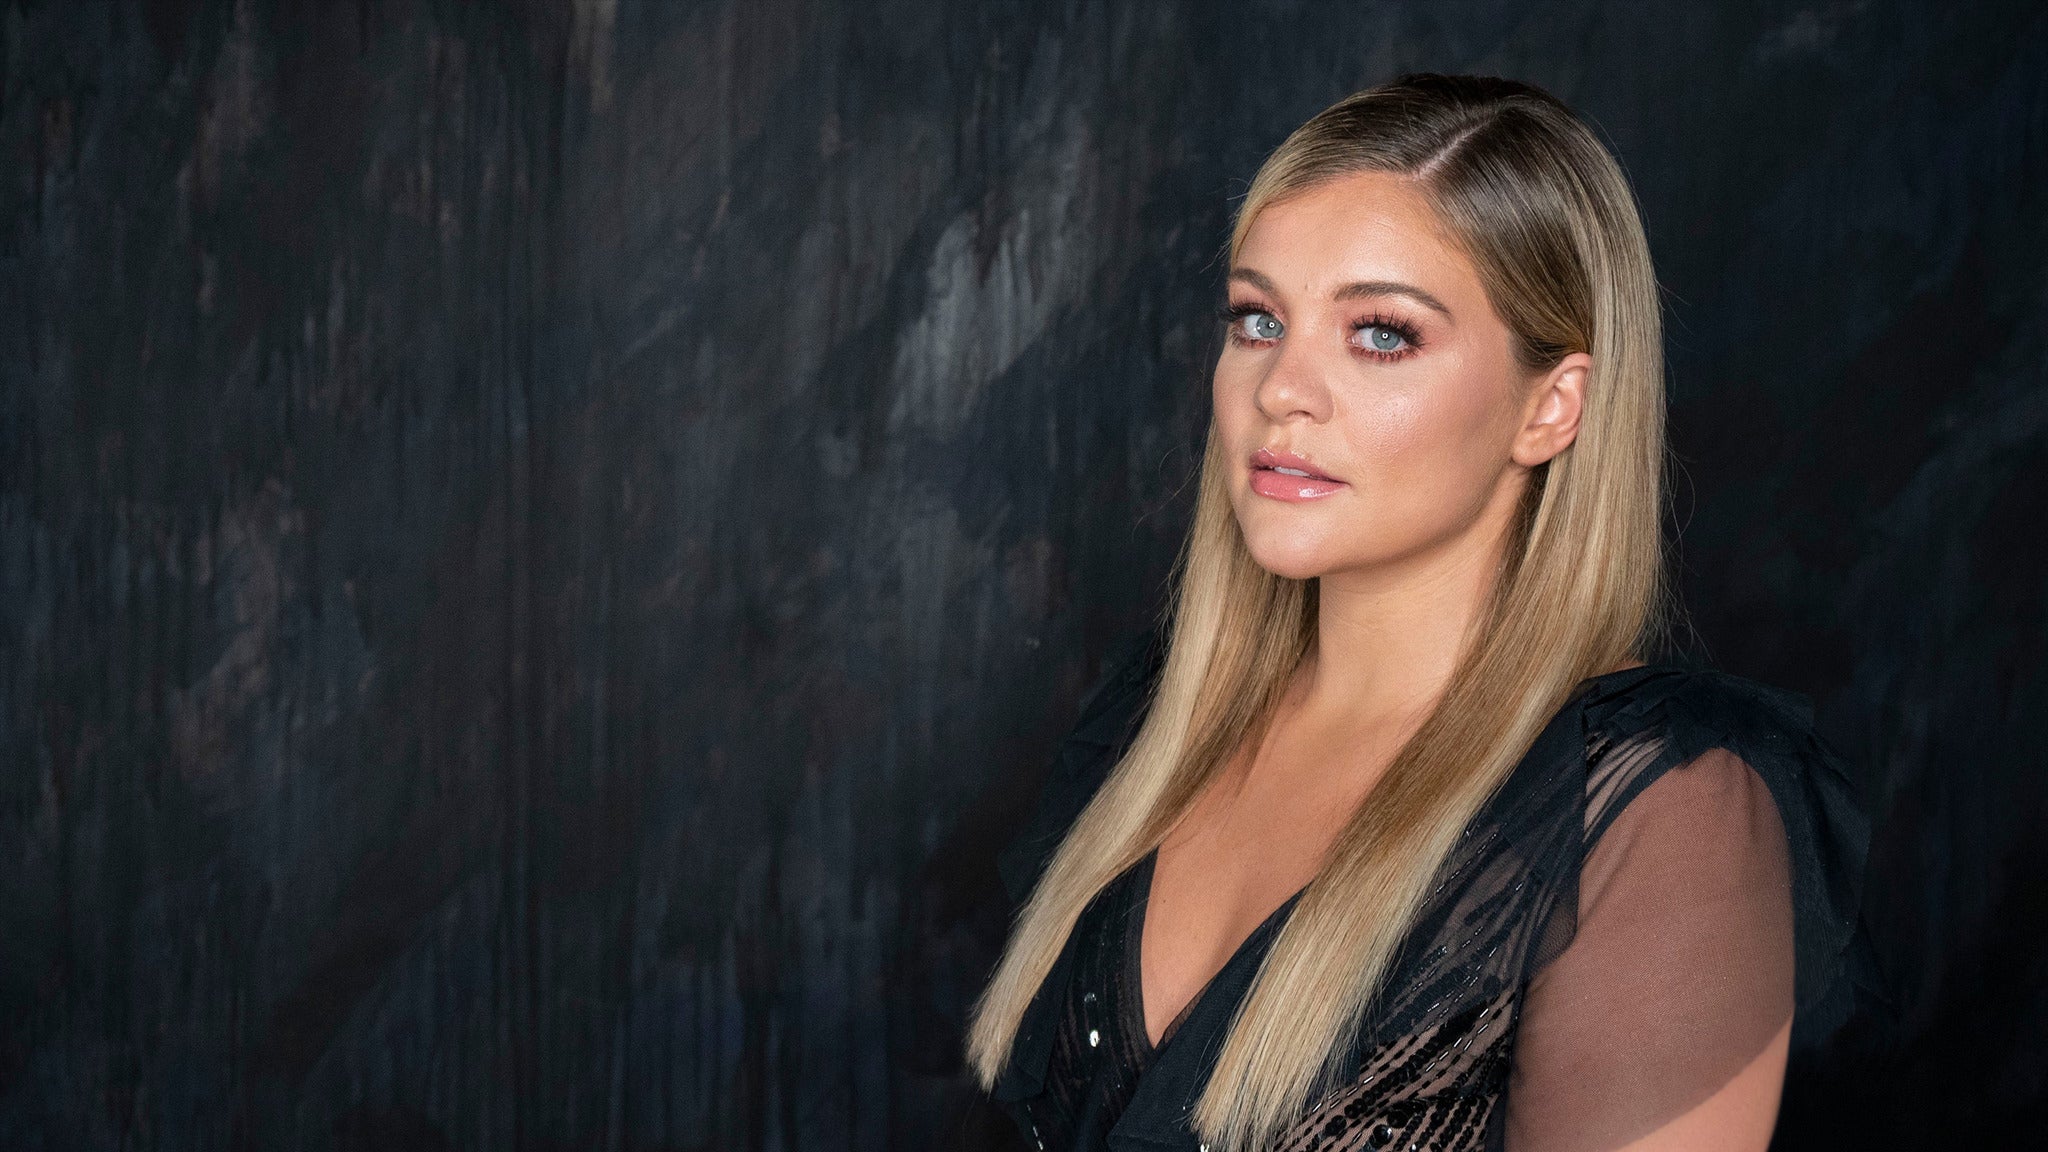 Lauren Alaina - Top Of The World Tour in Silver Spring promo photo for VIP Package presale offer code